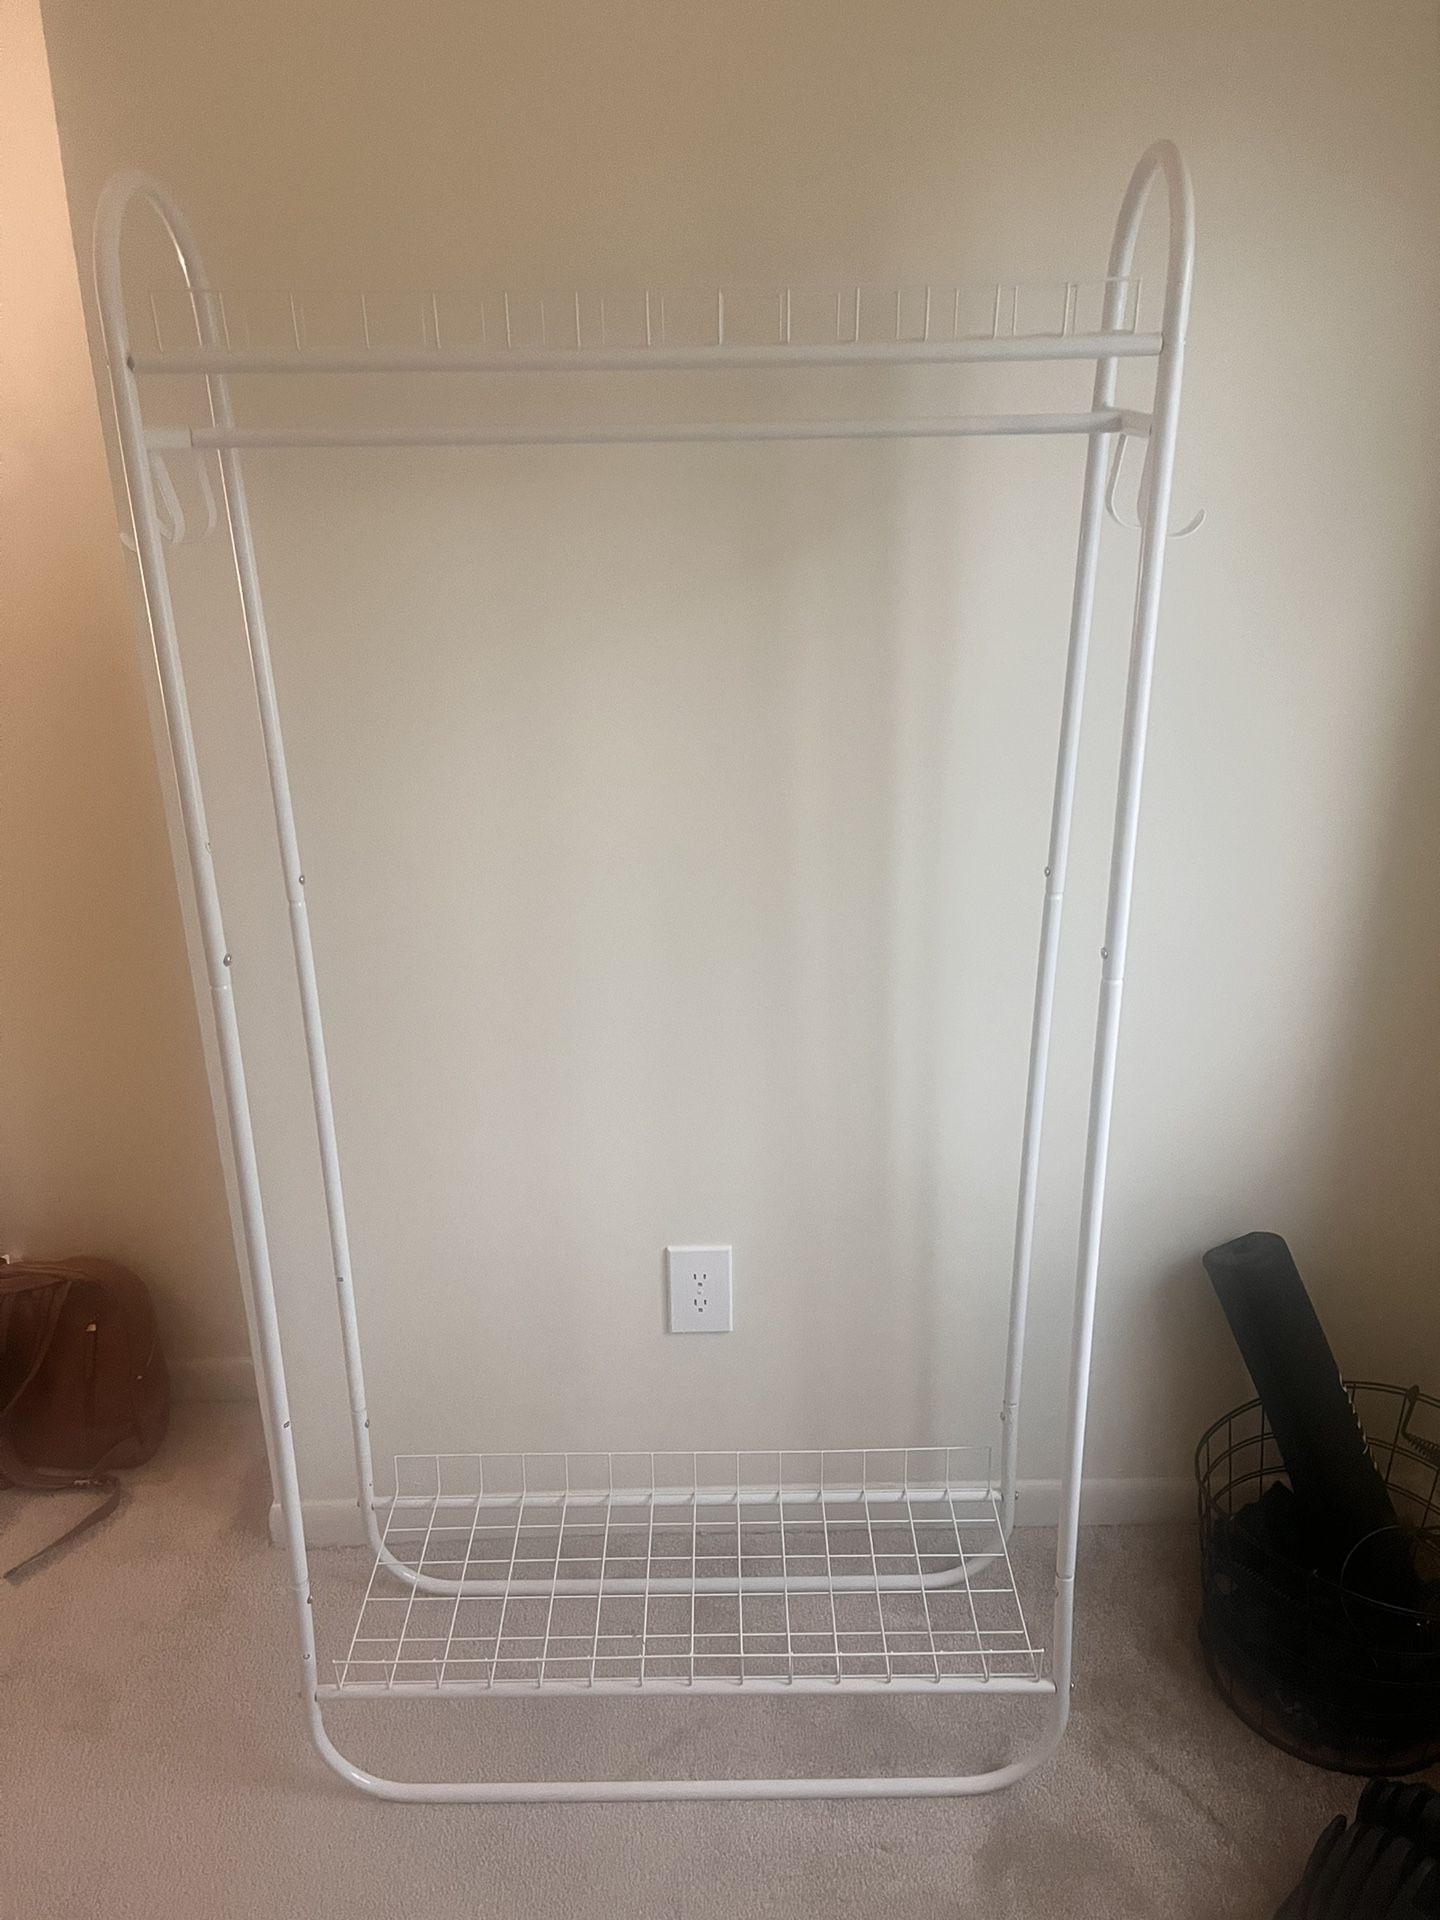 Clothes Rack With Shelves